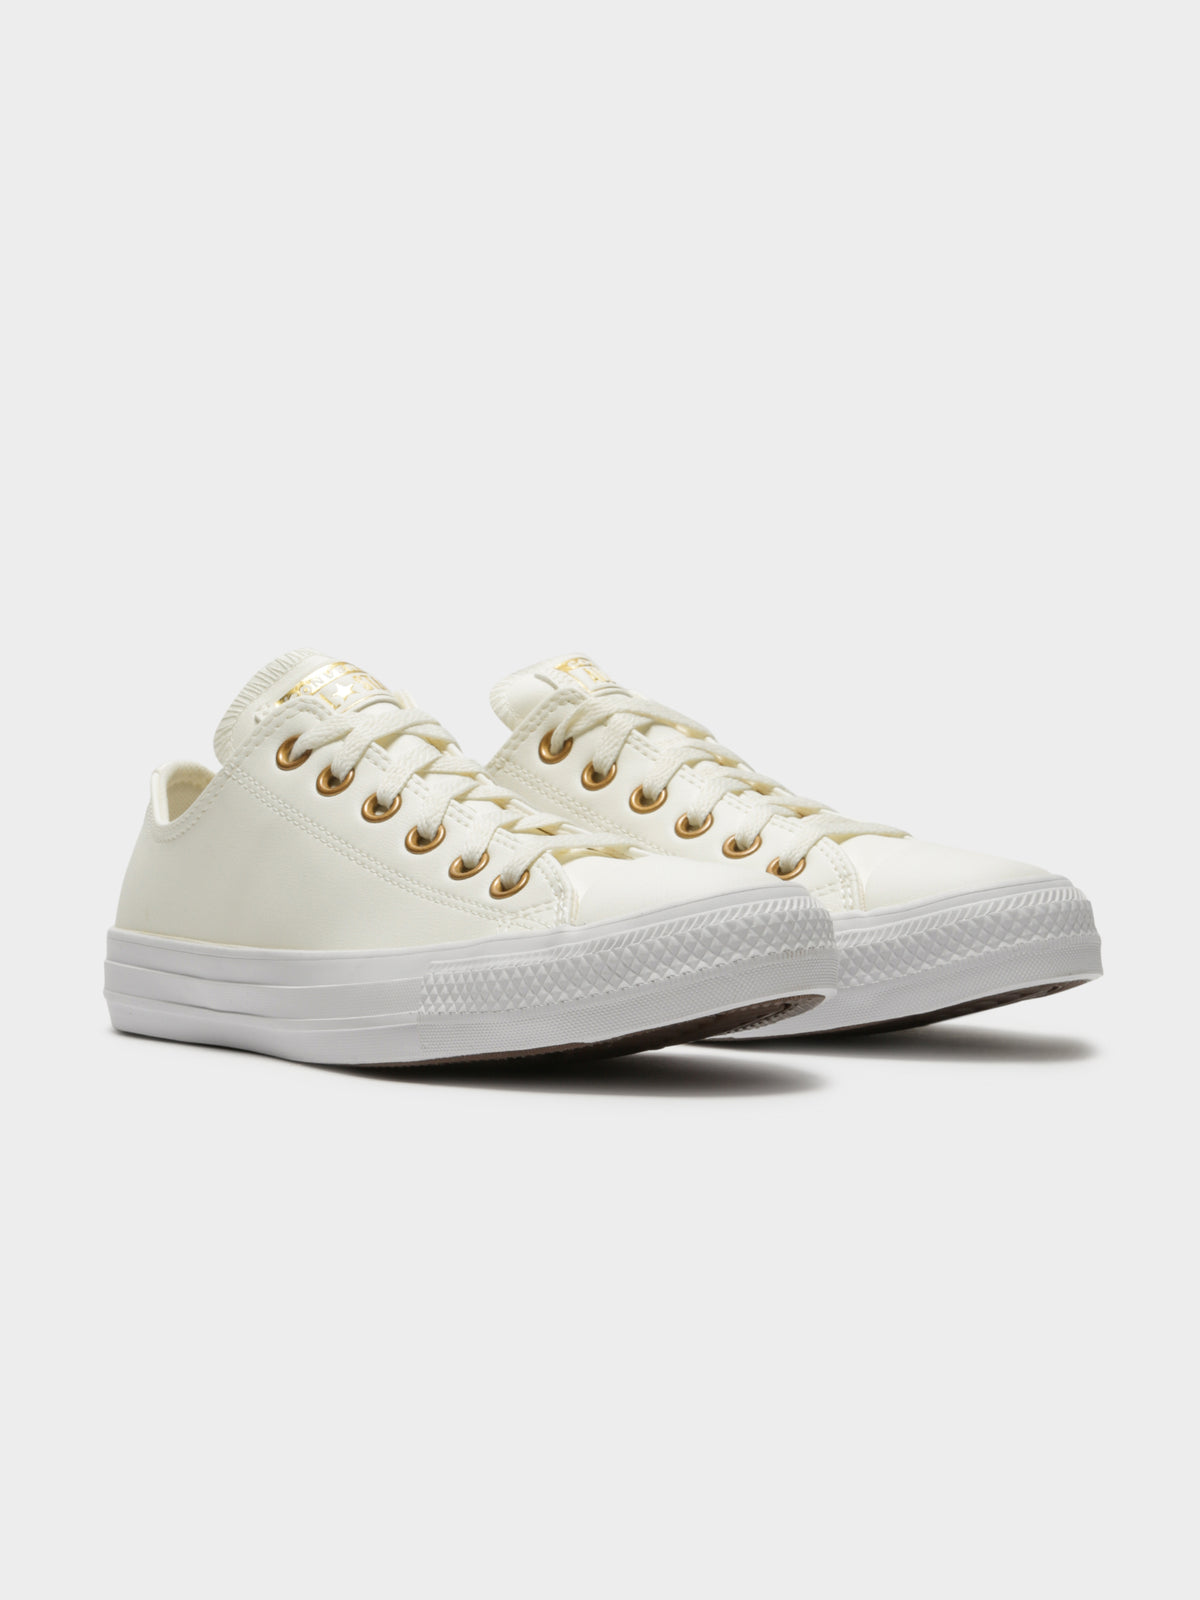 Womens Chuck Taylor All Star Go Gold Lo Top Sneakers in Egret Gold &amp; White